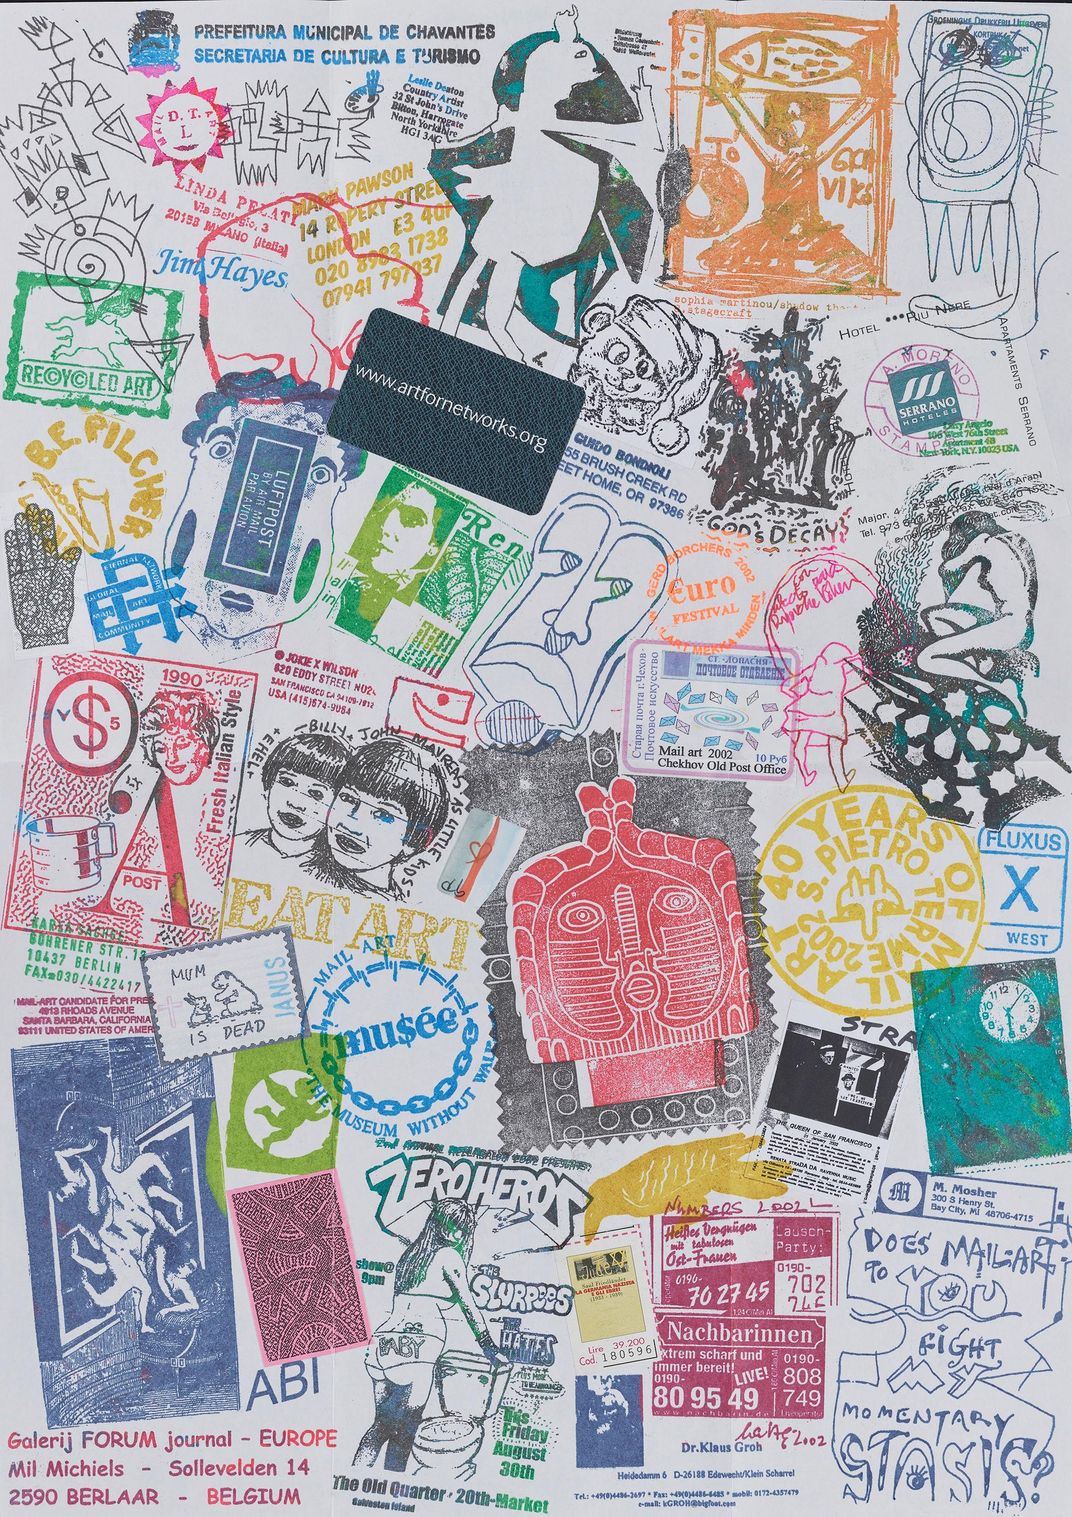 Collaborative “Mail Art” Puts the Post in Postmodernism